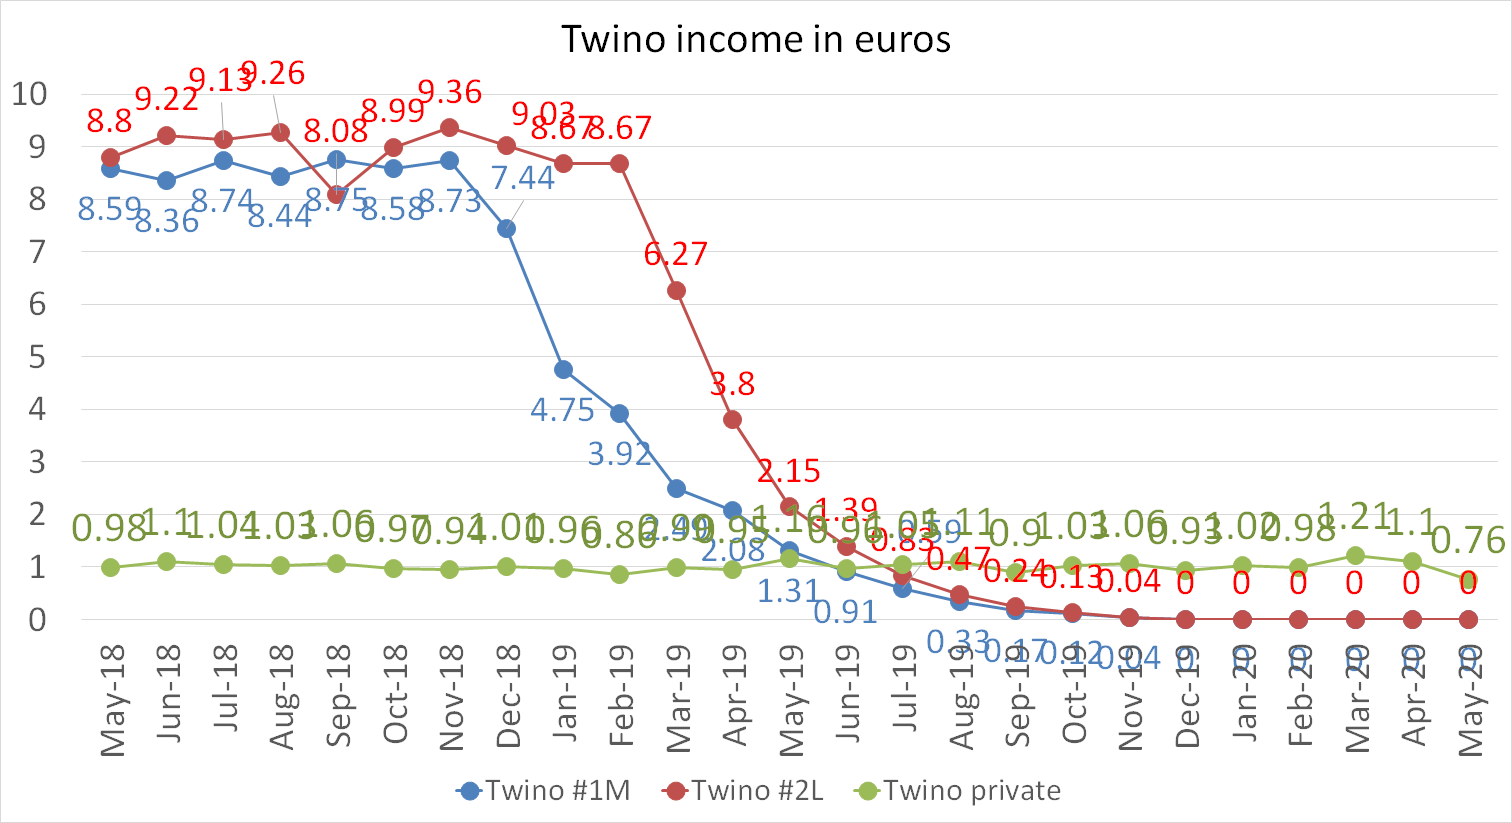 Twino income in euros may 2020